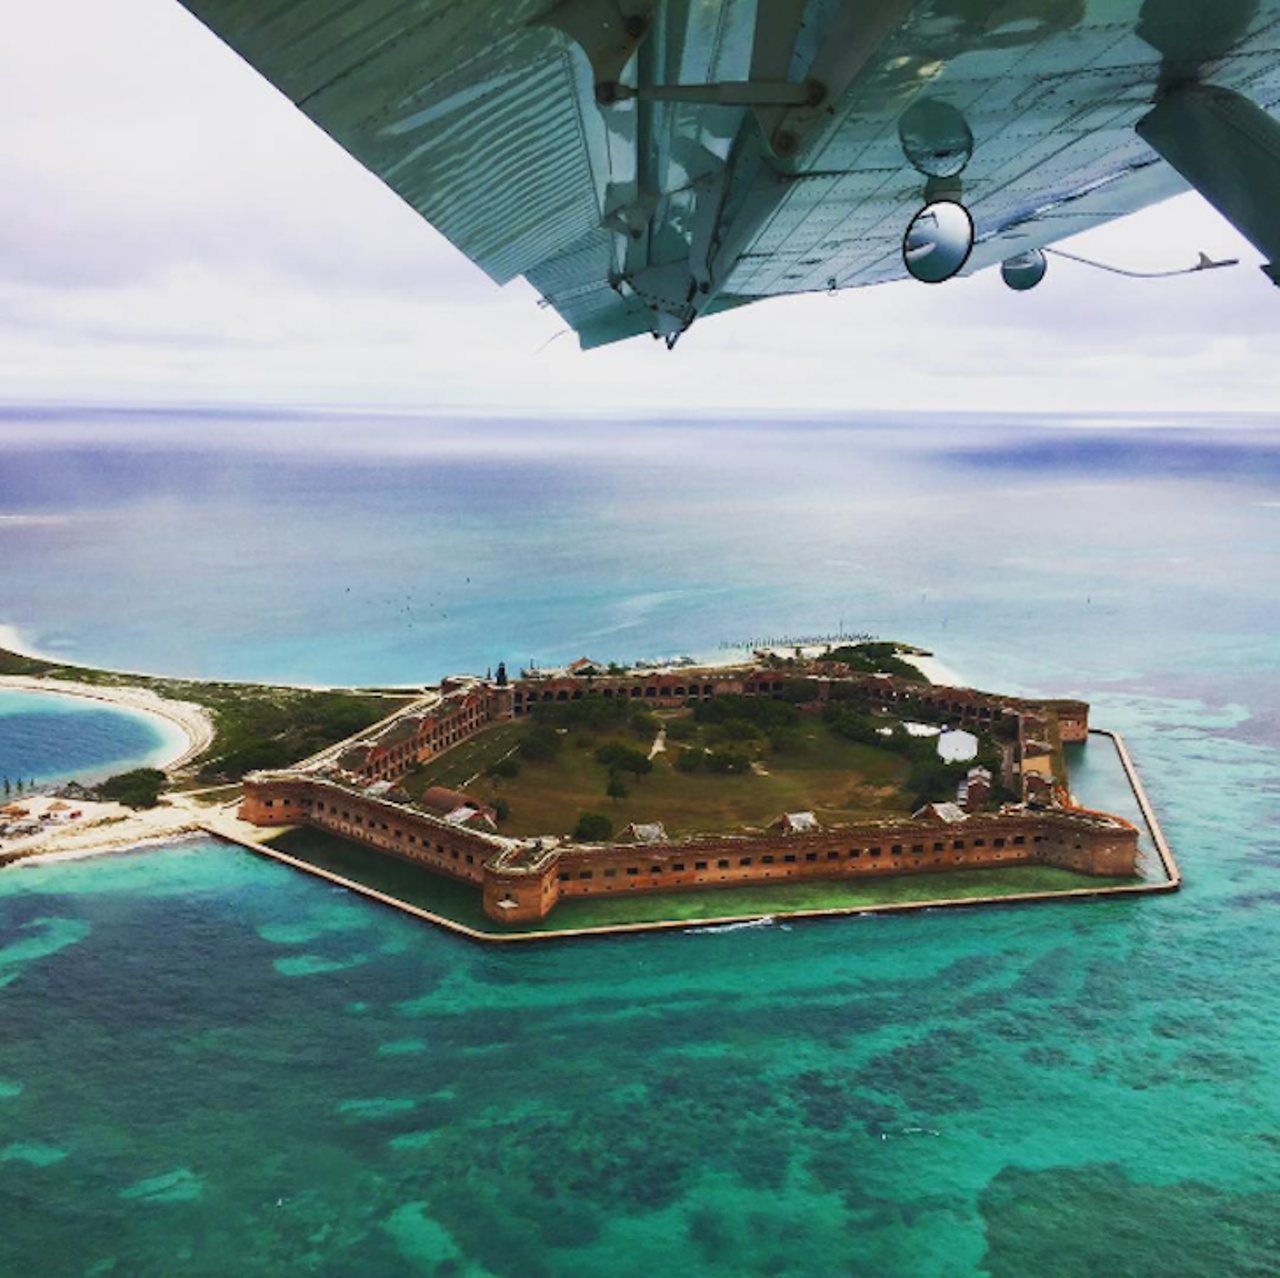 Dry Tortugas
40001 SR-9336, Homestead | 305-242-7700 
Grab a ferry and travel into Florida&#146;s past at Dry Tortugas, which served as a federal prison during the Civil War. Unlike many forts, you can actually camp here, so pitch a tent &#145;cause you&#146;ll want to soak in the royal blue water here with as much snorkeling as possible. 
Photo via heyhaley26/Instagram